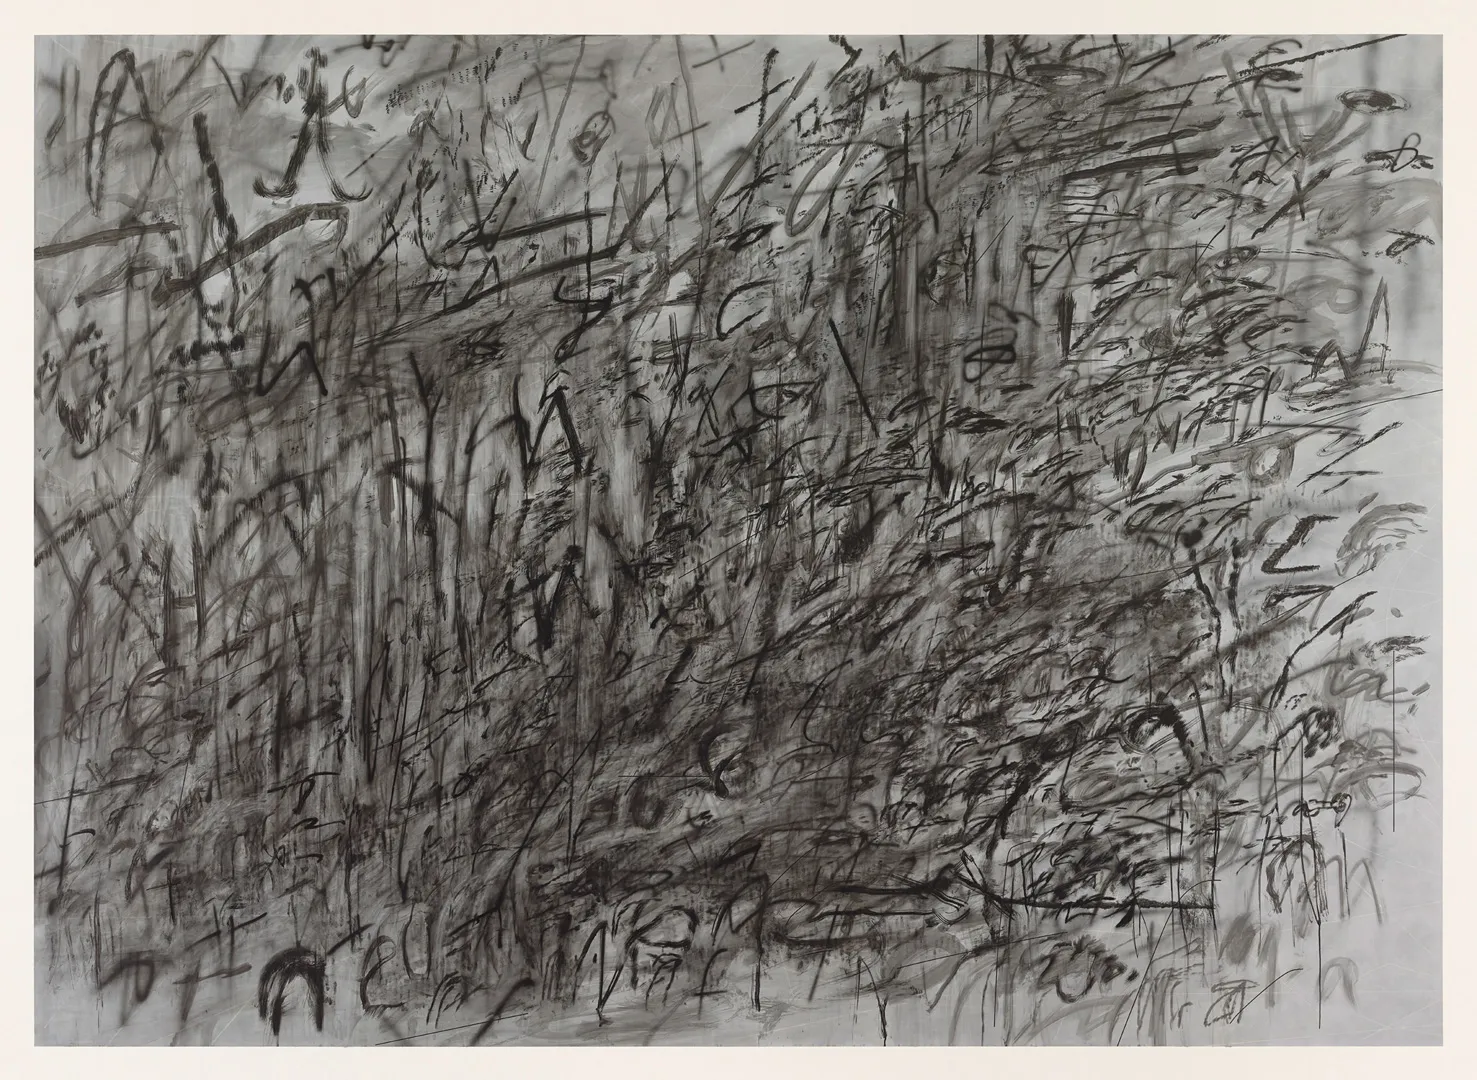 Julie Mehretu - Invisible Sun (algorithm 8, fable form), 2015, ink and acrylic on canvas